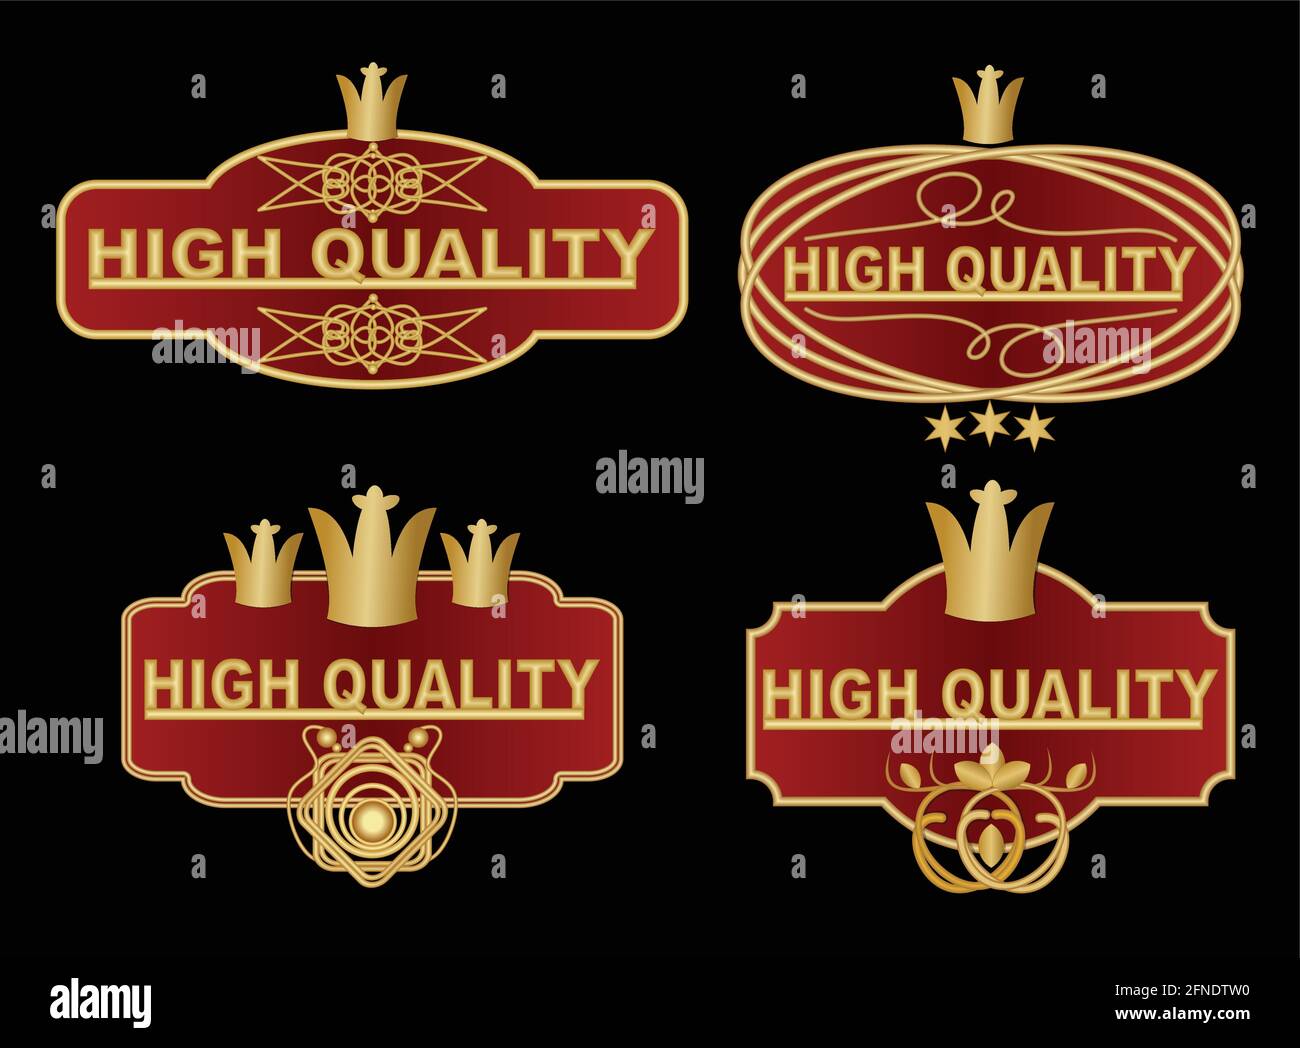 Set of high quality label in dark red and gold design with graphic ornate elements, royal crown, stars. High quality vintage stickers in  vector eps 1 Stock Vector